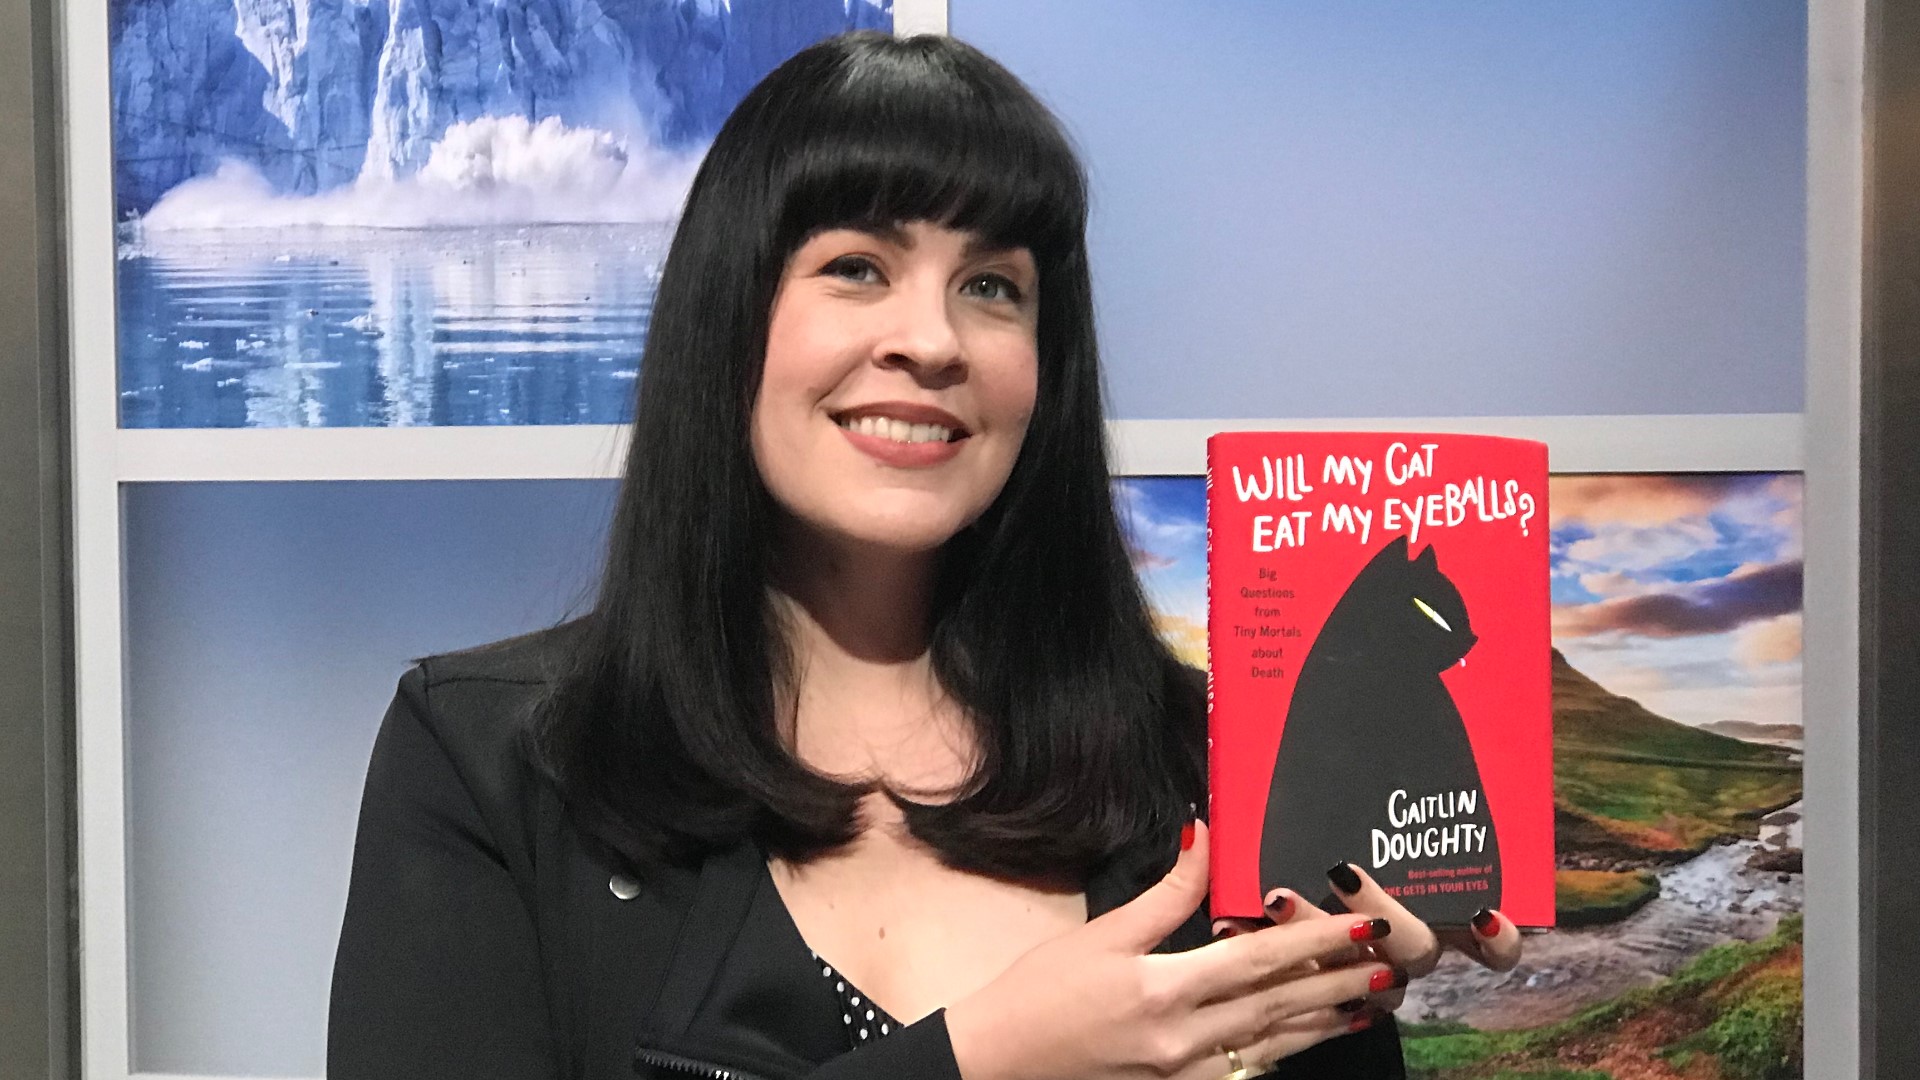 Caitlin Doughty is a mortician, activist and funeral industry rabble-rouser whose book light-heartedly answers 35 morbid questions from kids